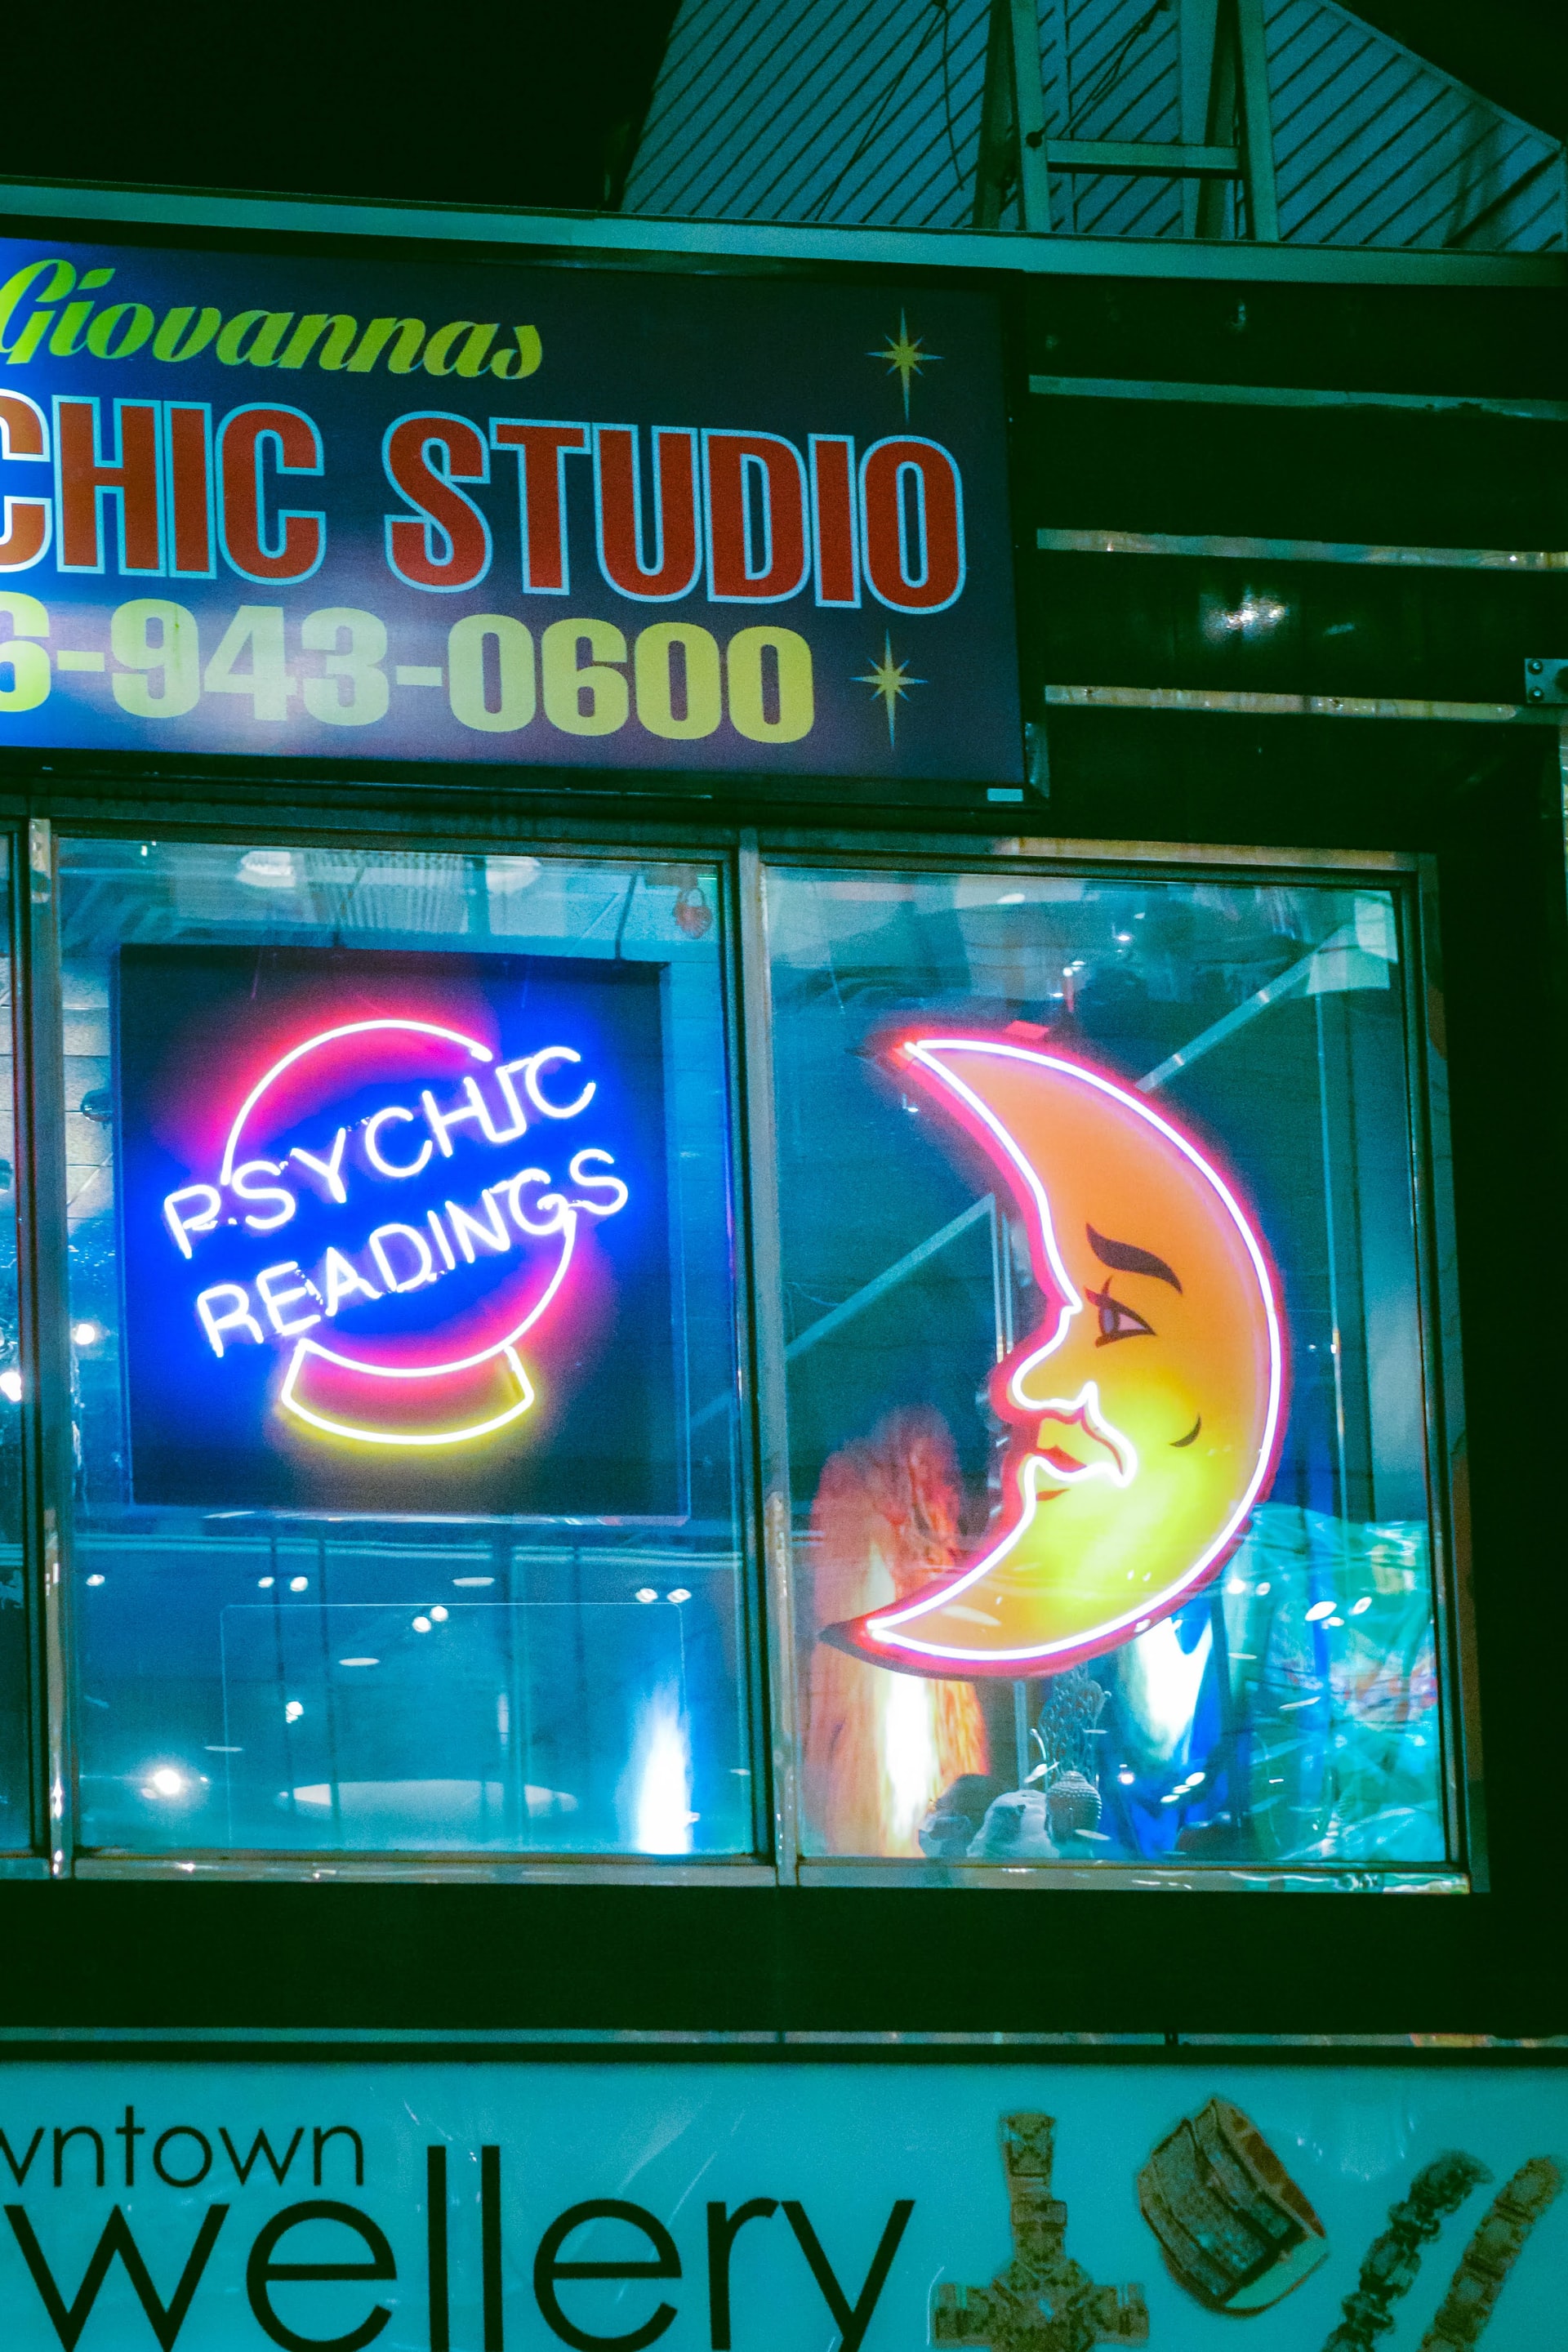 Crescent moon neon sign with another neon sign that reads psychic readings and the name and number of the studio